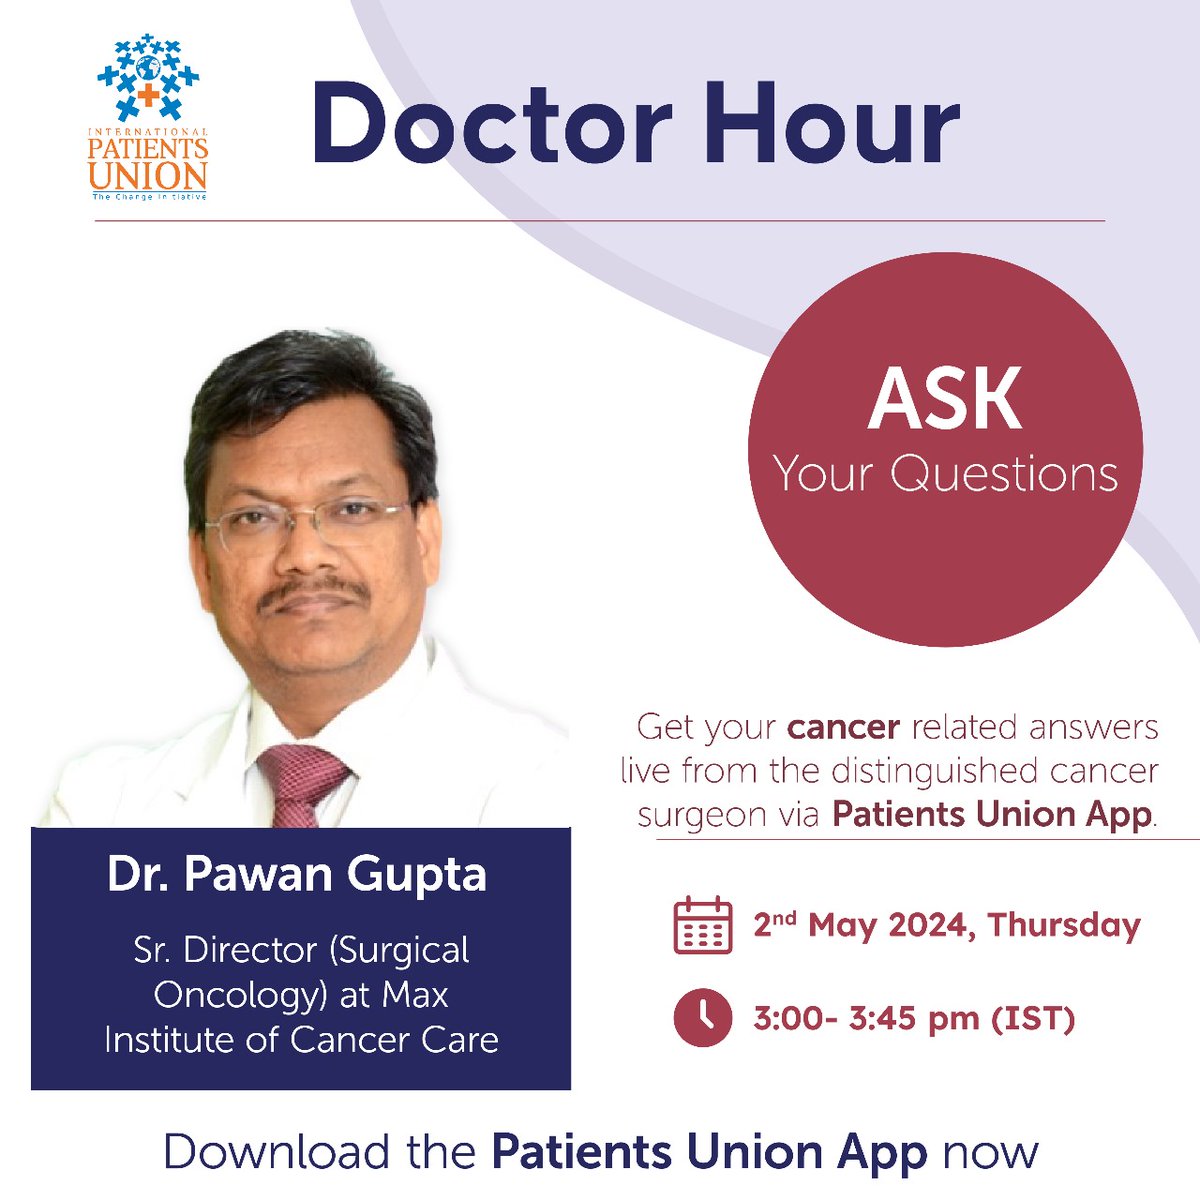 Join the #DoctorHour on the #PatientsUnion App & ask your queries to a distinguished #Cancer Surgeon, Dr.Pawan Gupta,Sr. Director(Surgical Oncology) at Max Institute of Cancer Care Delhi NCR, & Founder of ICanCaRe - Innovative Cancer Care & Rehabilitation & get your answers live.